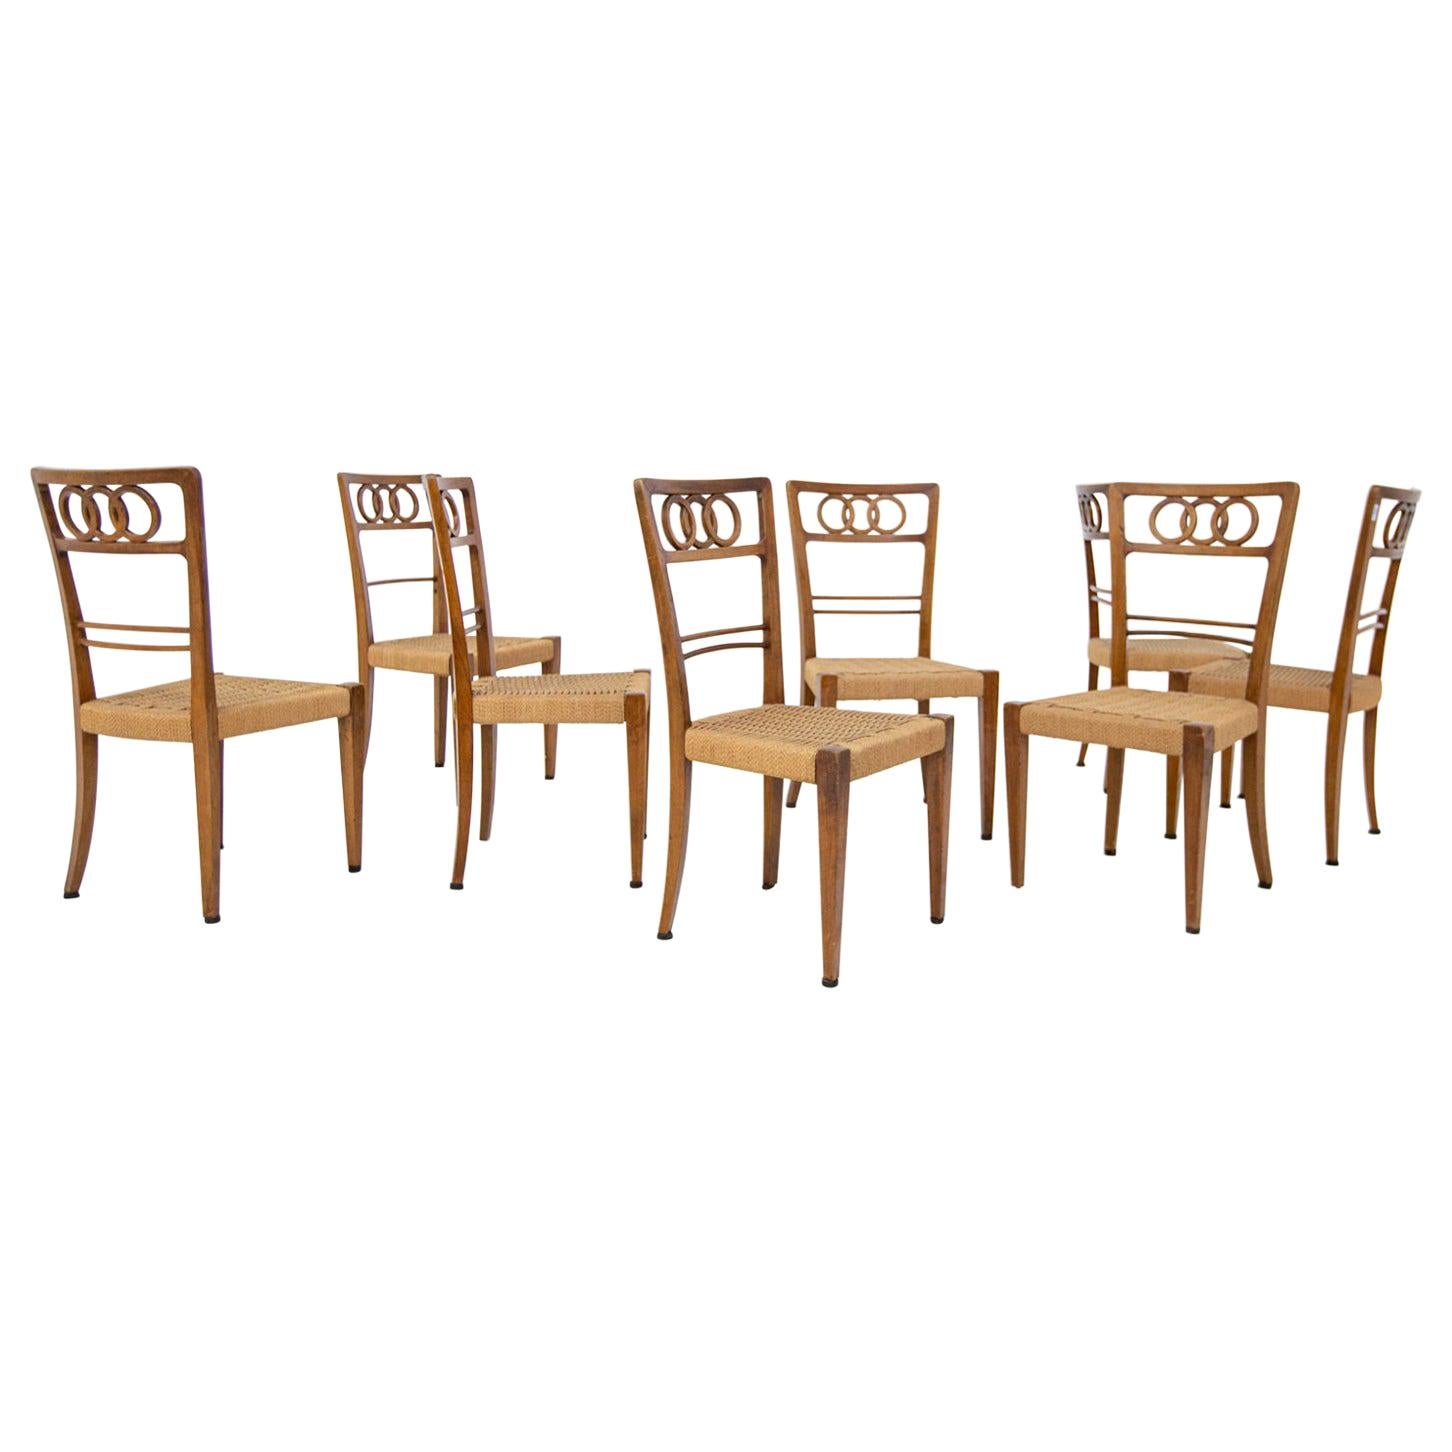 Paolo Buffa Attr. Set of Eight Chairs in Walnut Wood and Straw, 1950s